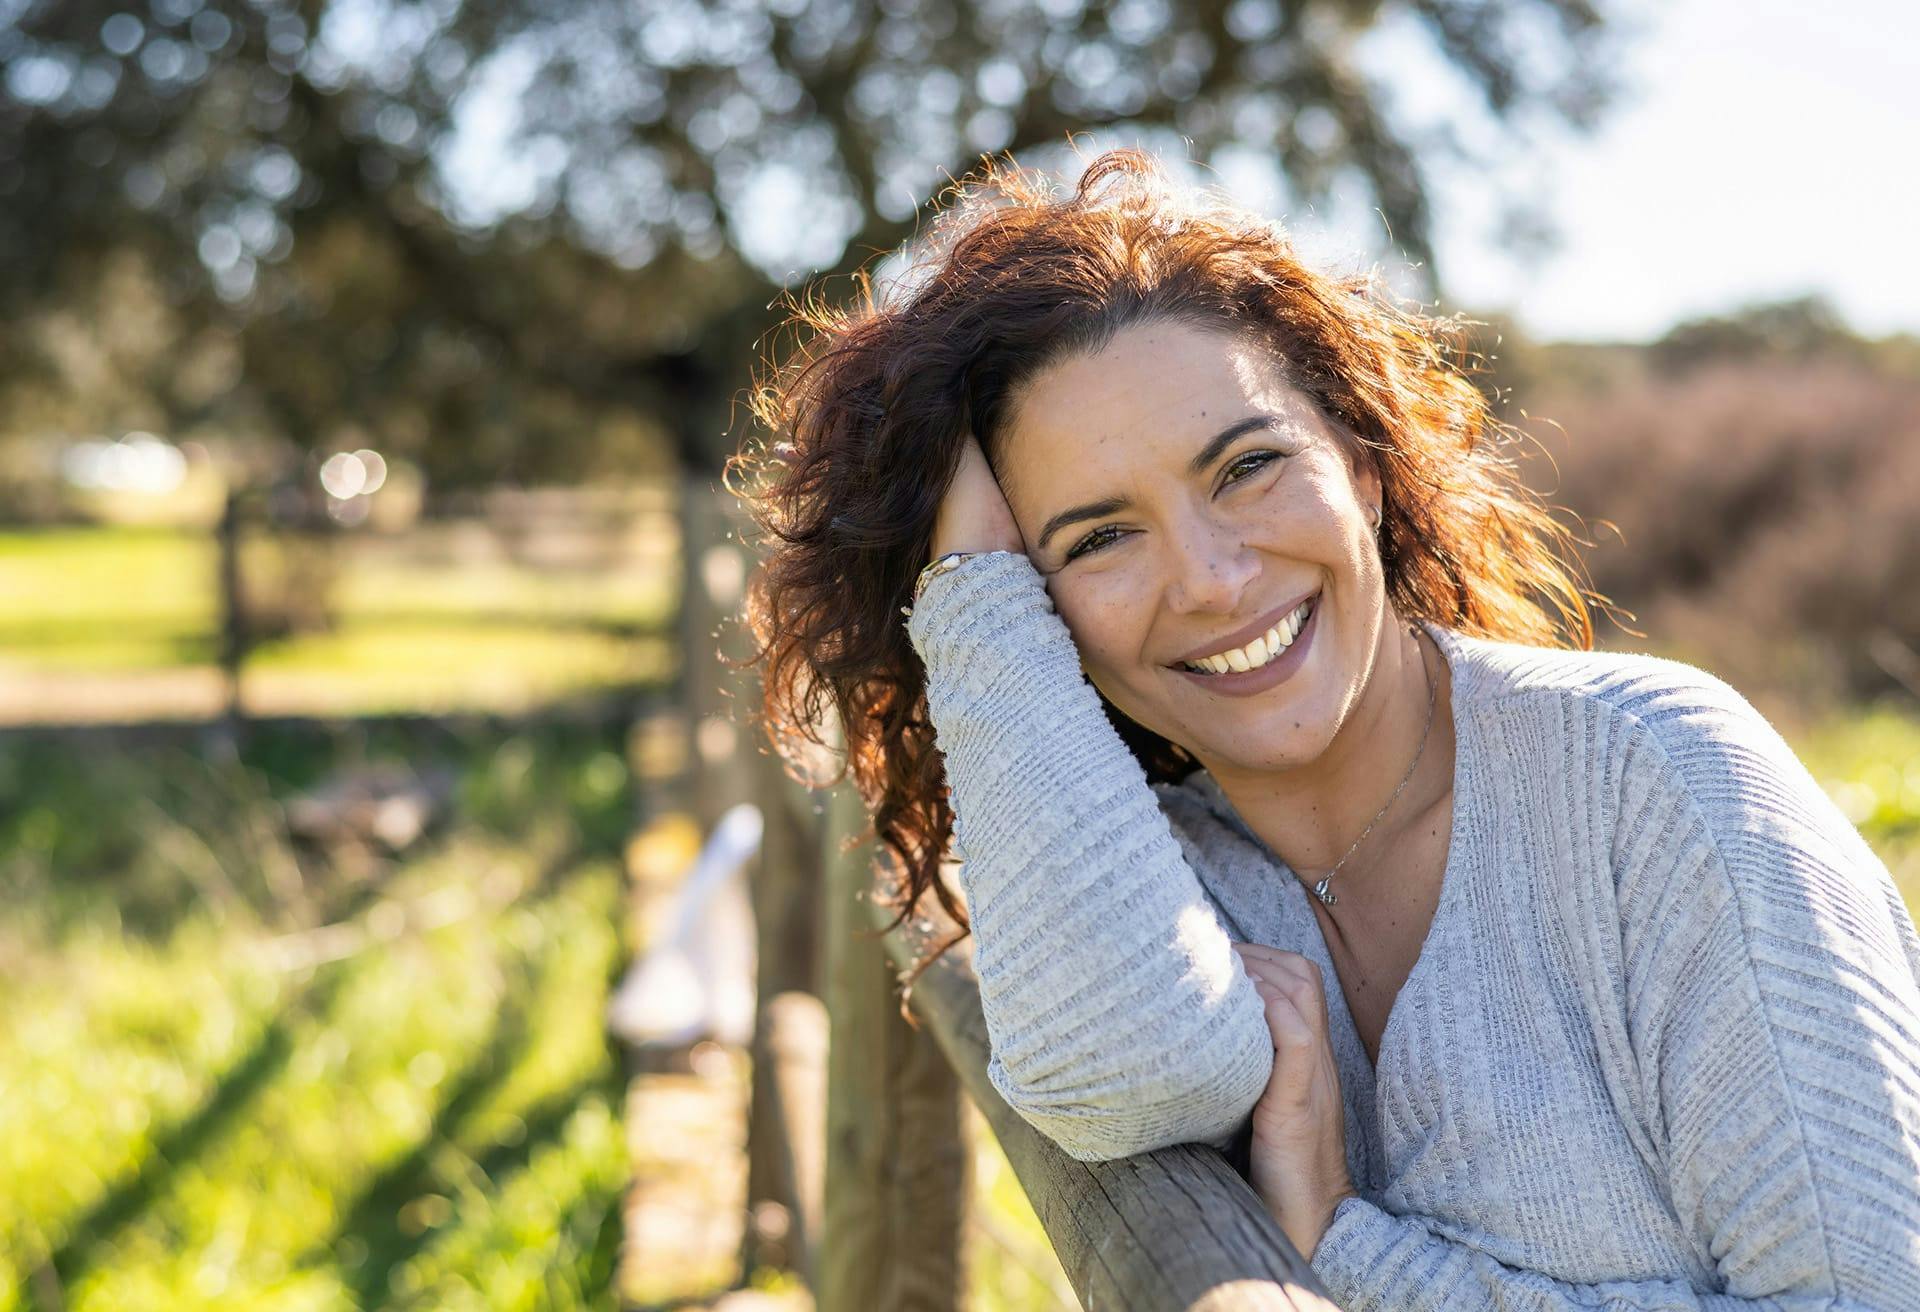 Smiling woman in grey sweater leaning on wooden fence.